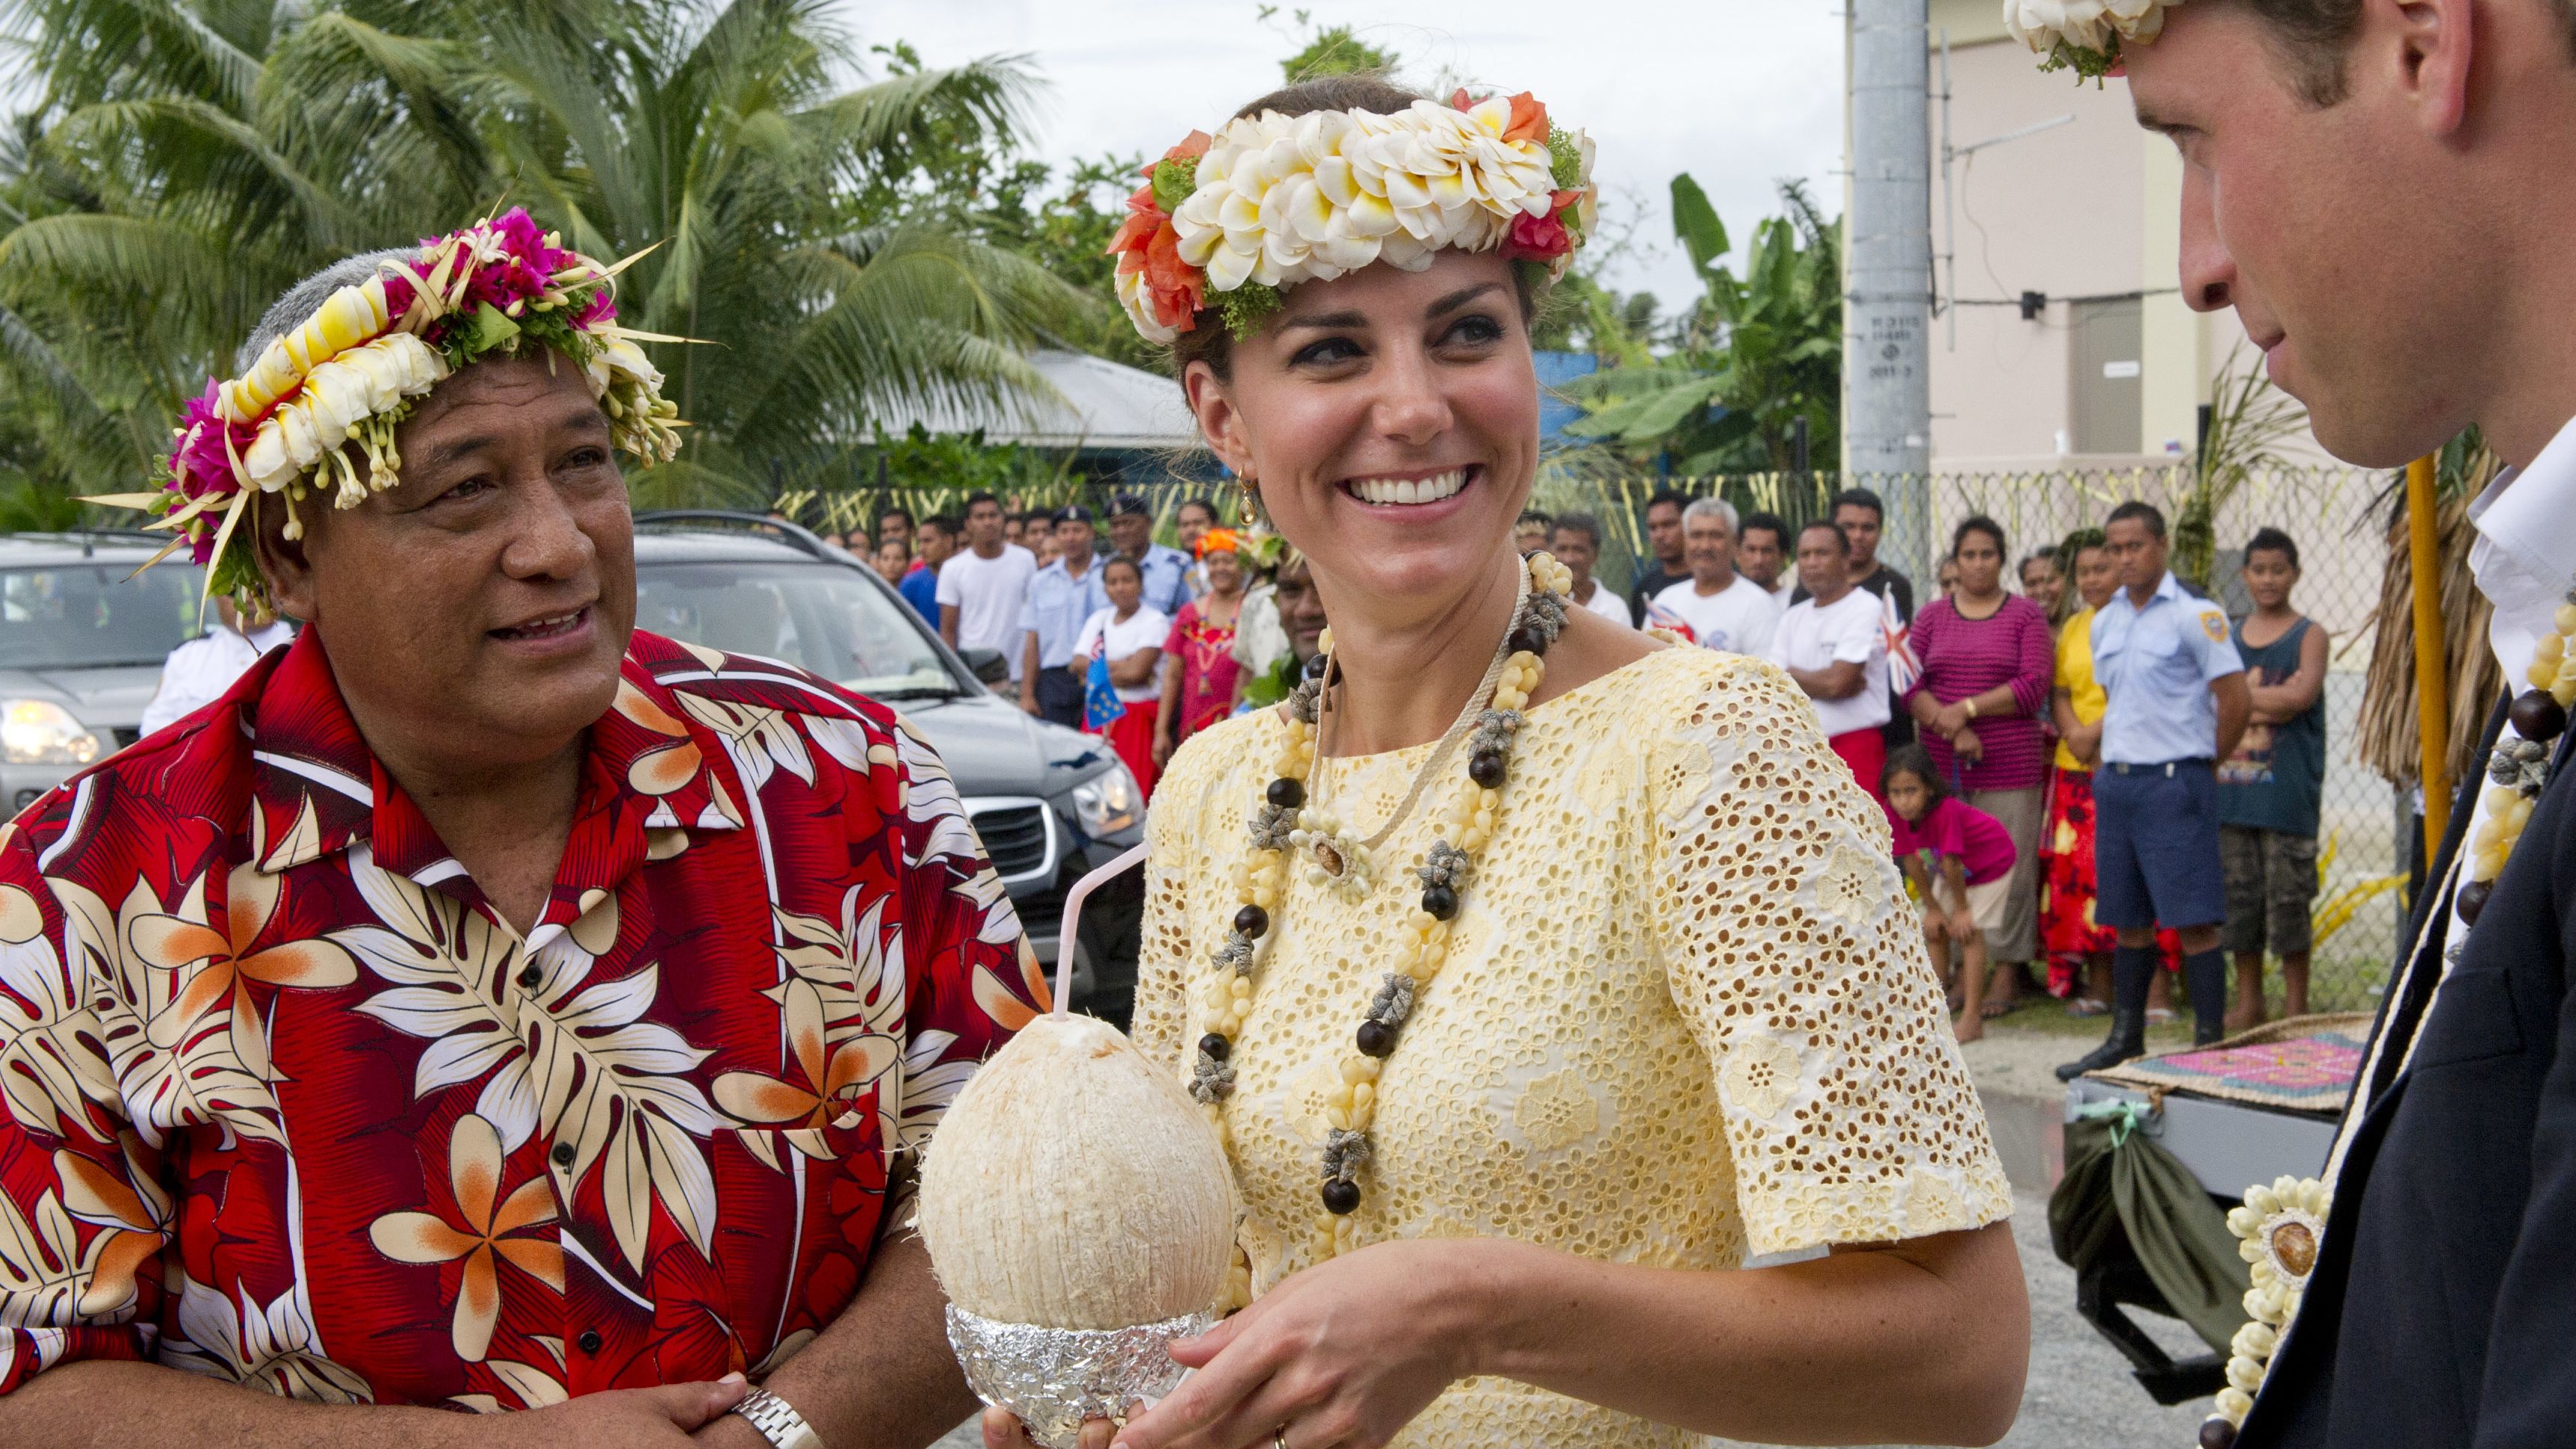 In September 2012, the couple drank coconut milk from a tree that Queen Elizabeth II planted decades ago in the South Pacific nation of Tuvalu. 